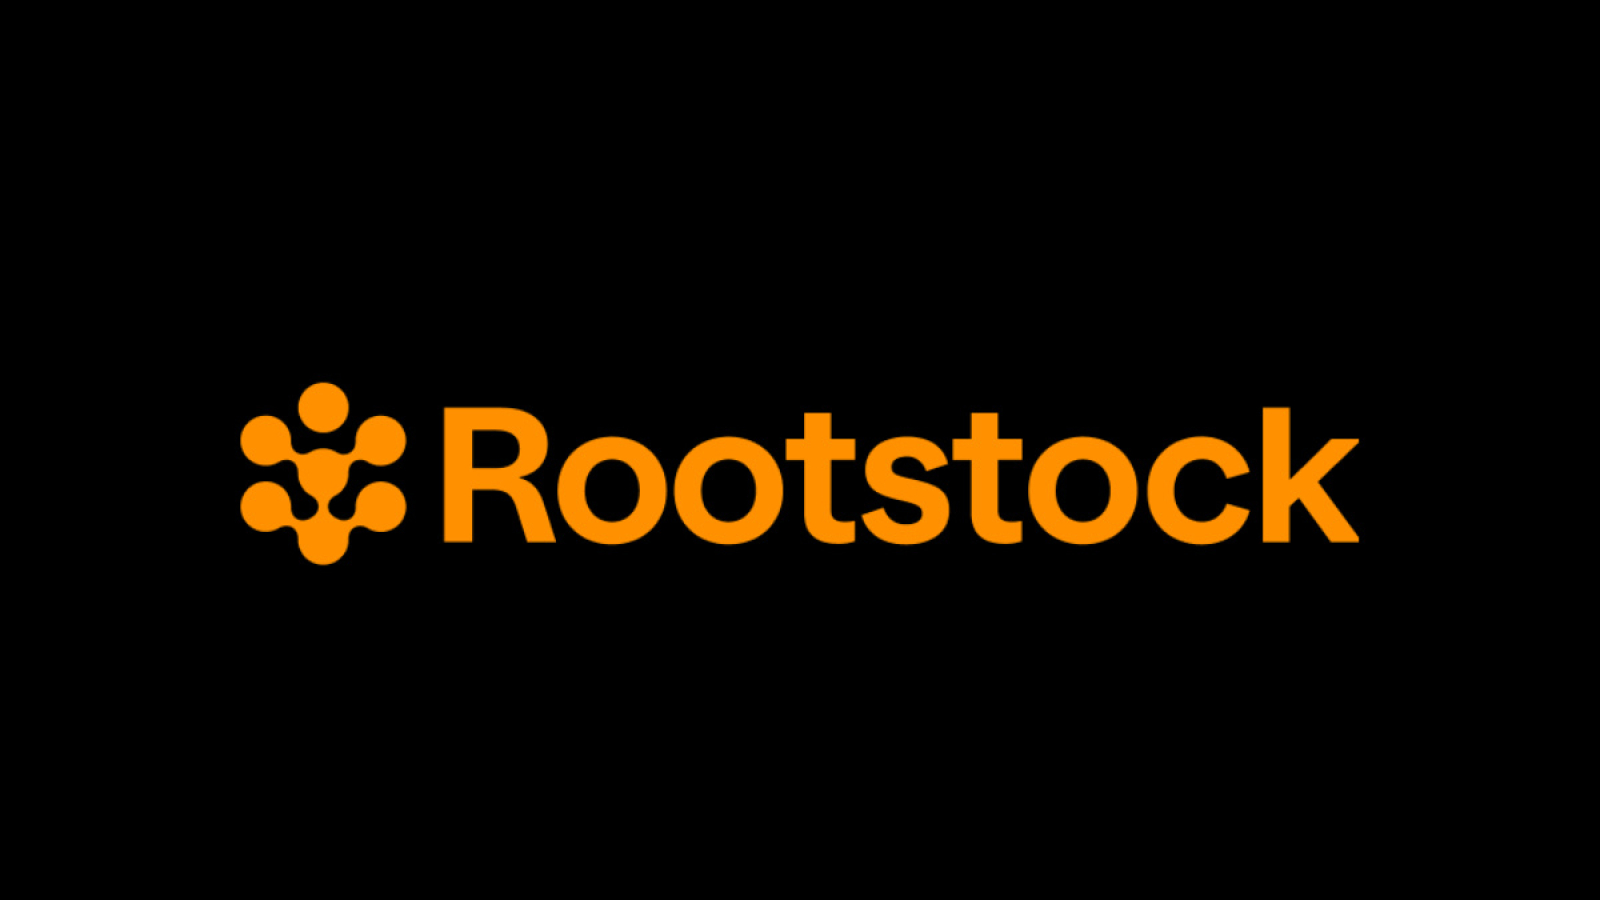 Defi Llama Confirms Rootstock As The First And Biggest Bitcoin Sidechain